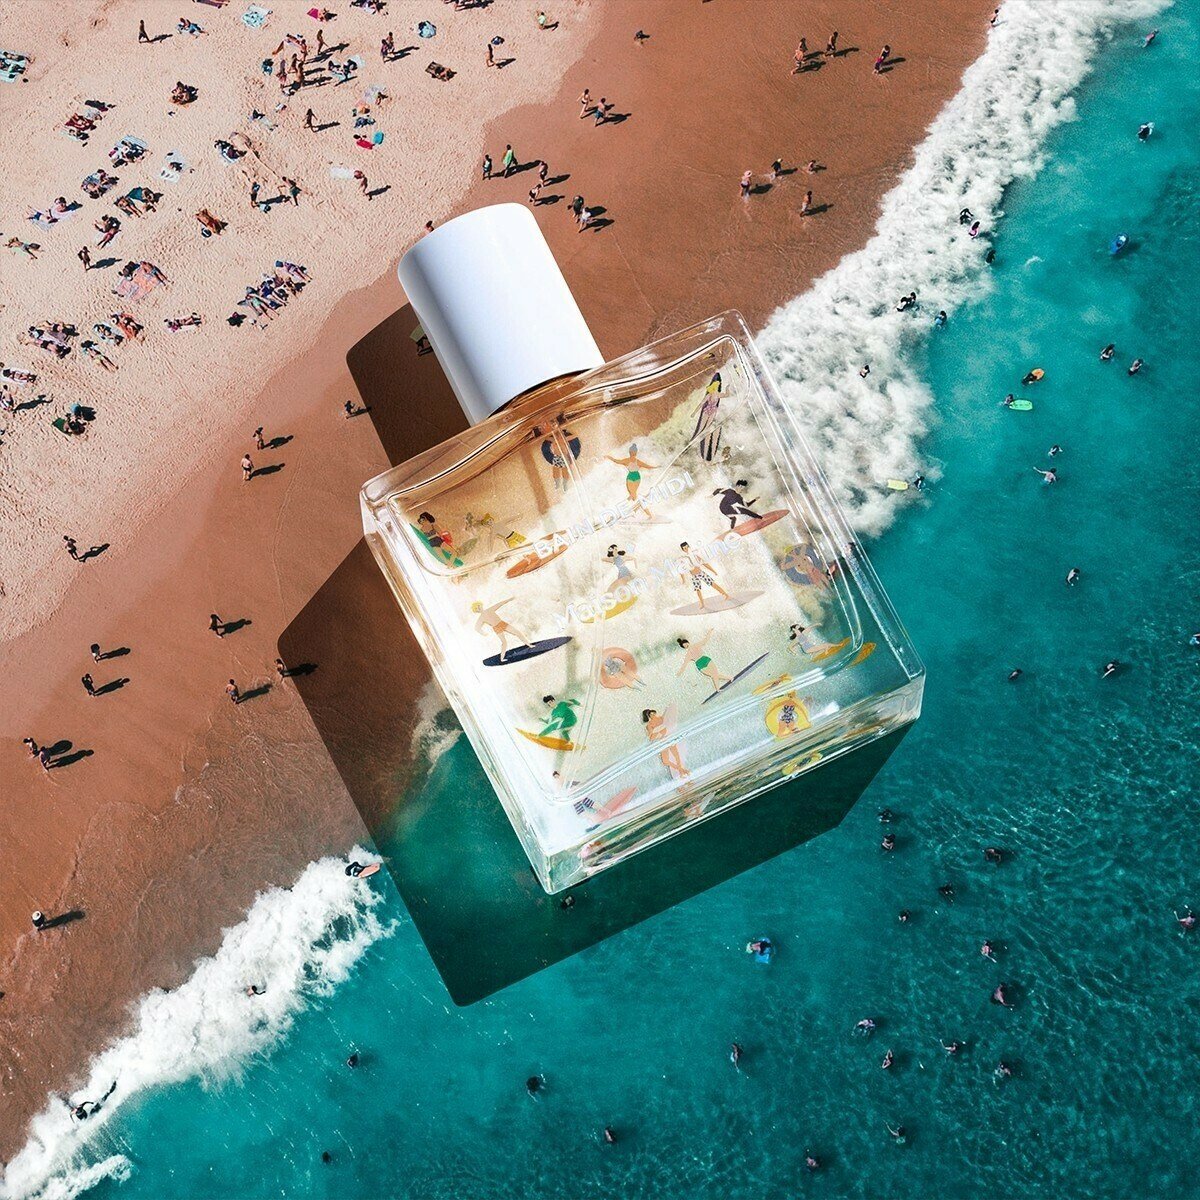 Louis Vuitton brings the ocean to you with the On the Beach perfume